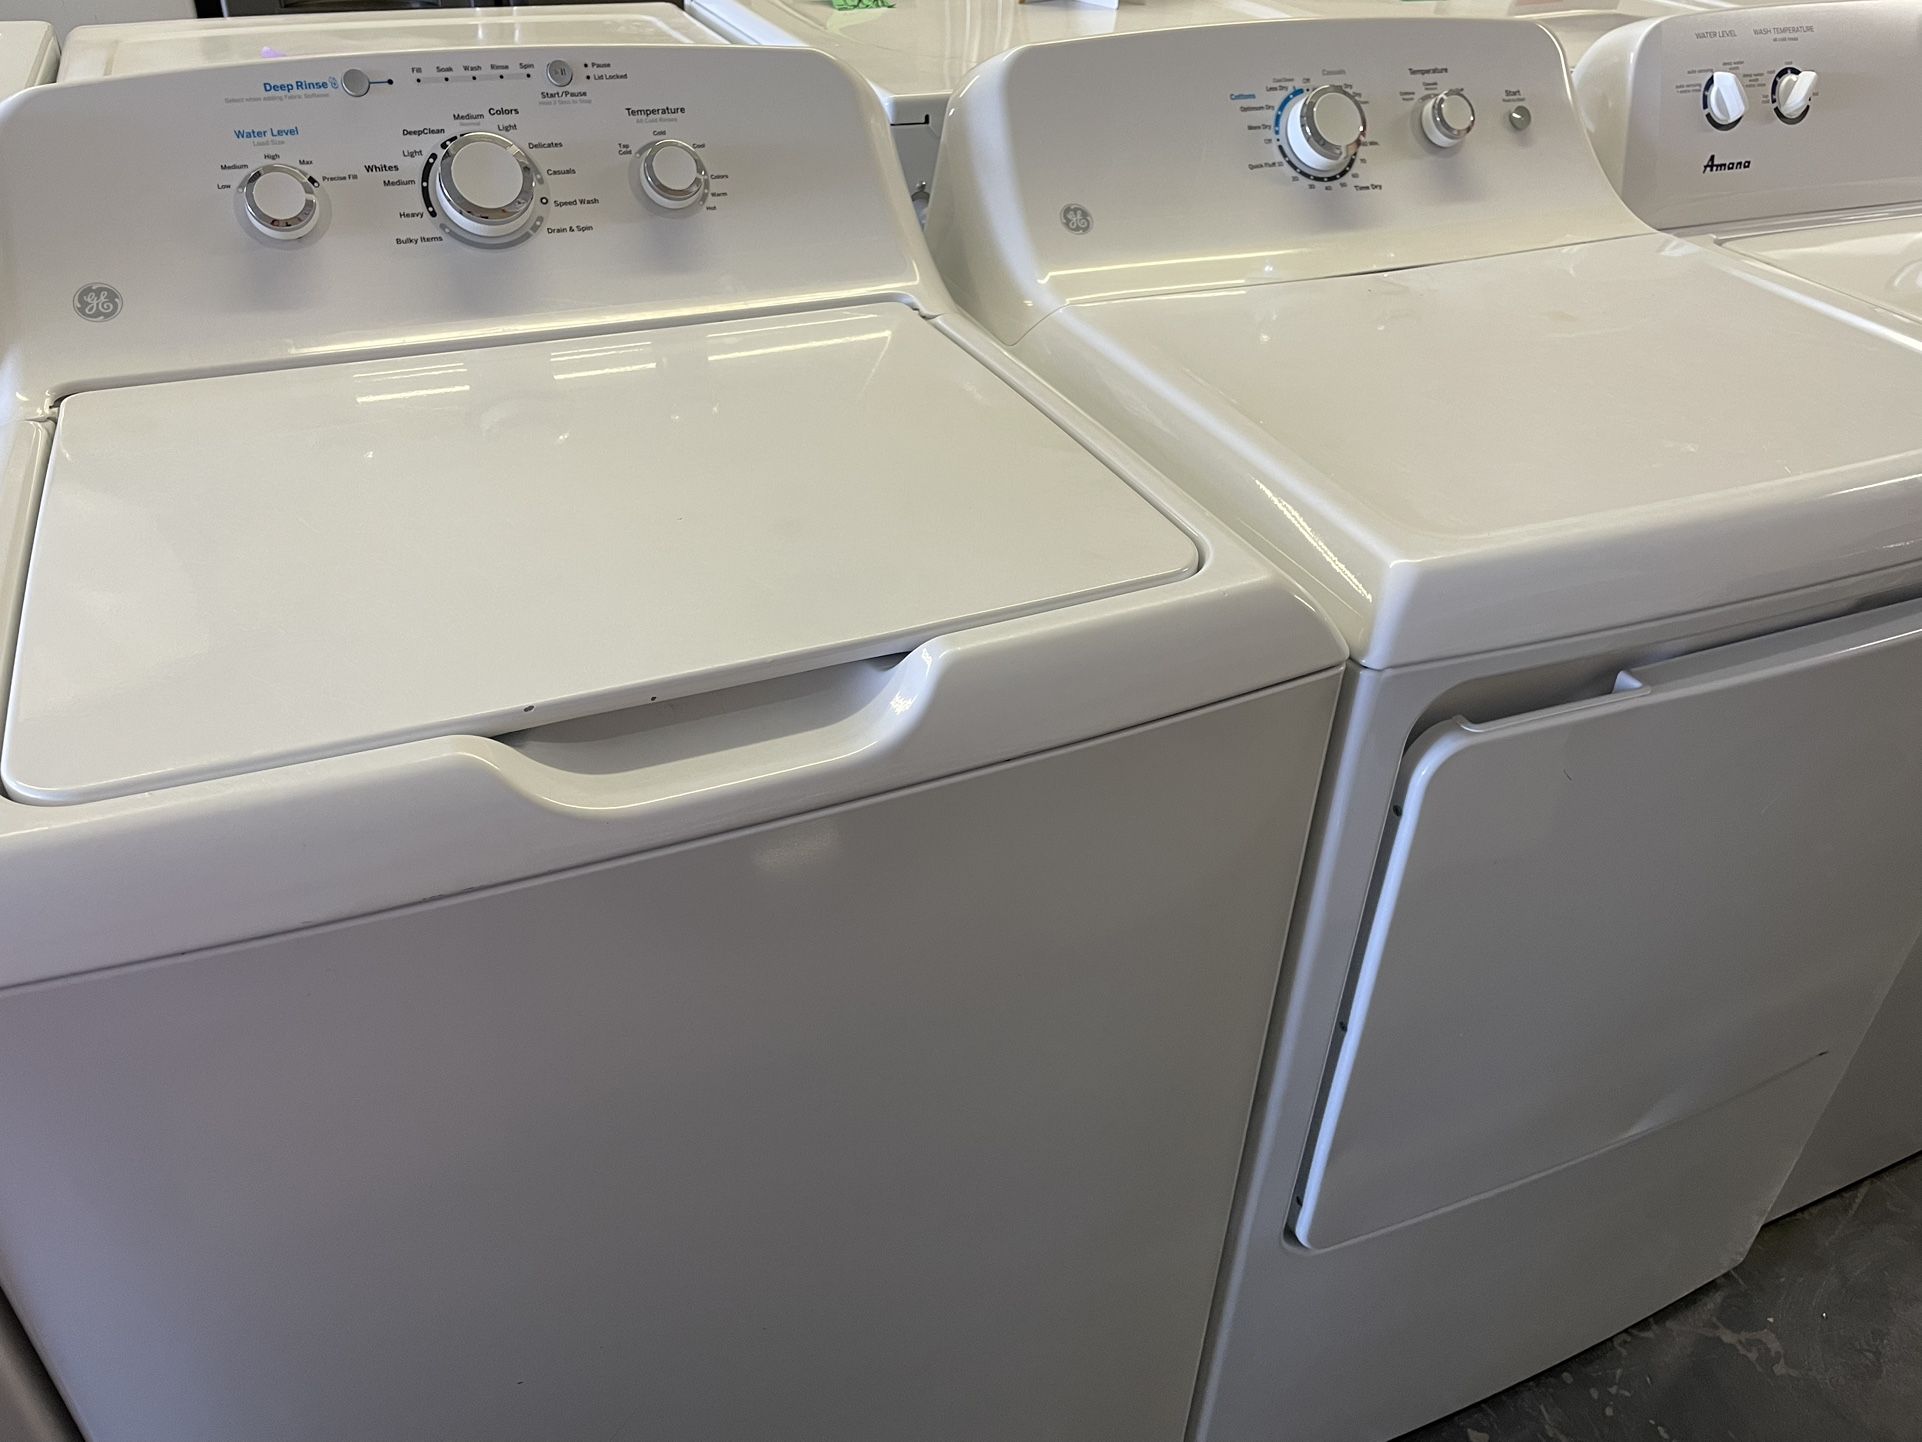 GE* 4.2cu.ft Washer and 7.2 cu.ft Electric Dryer Set